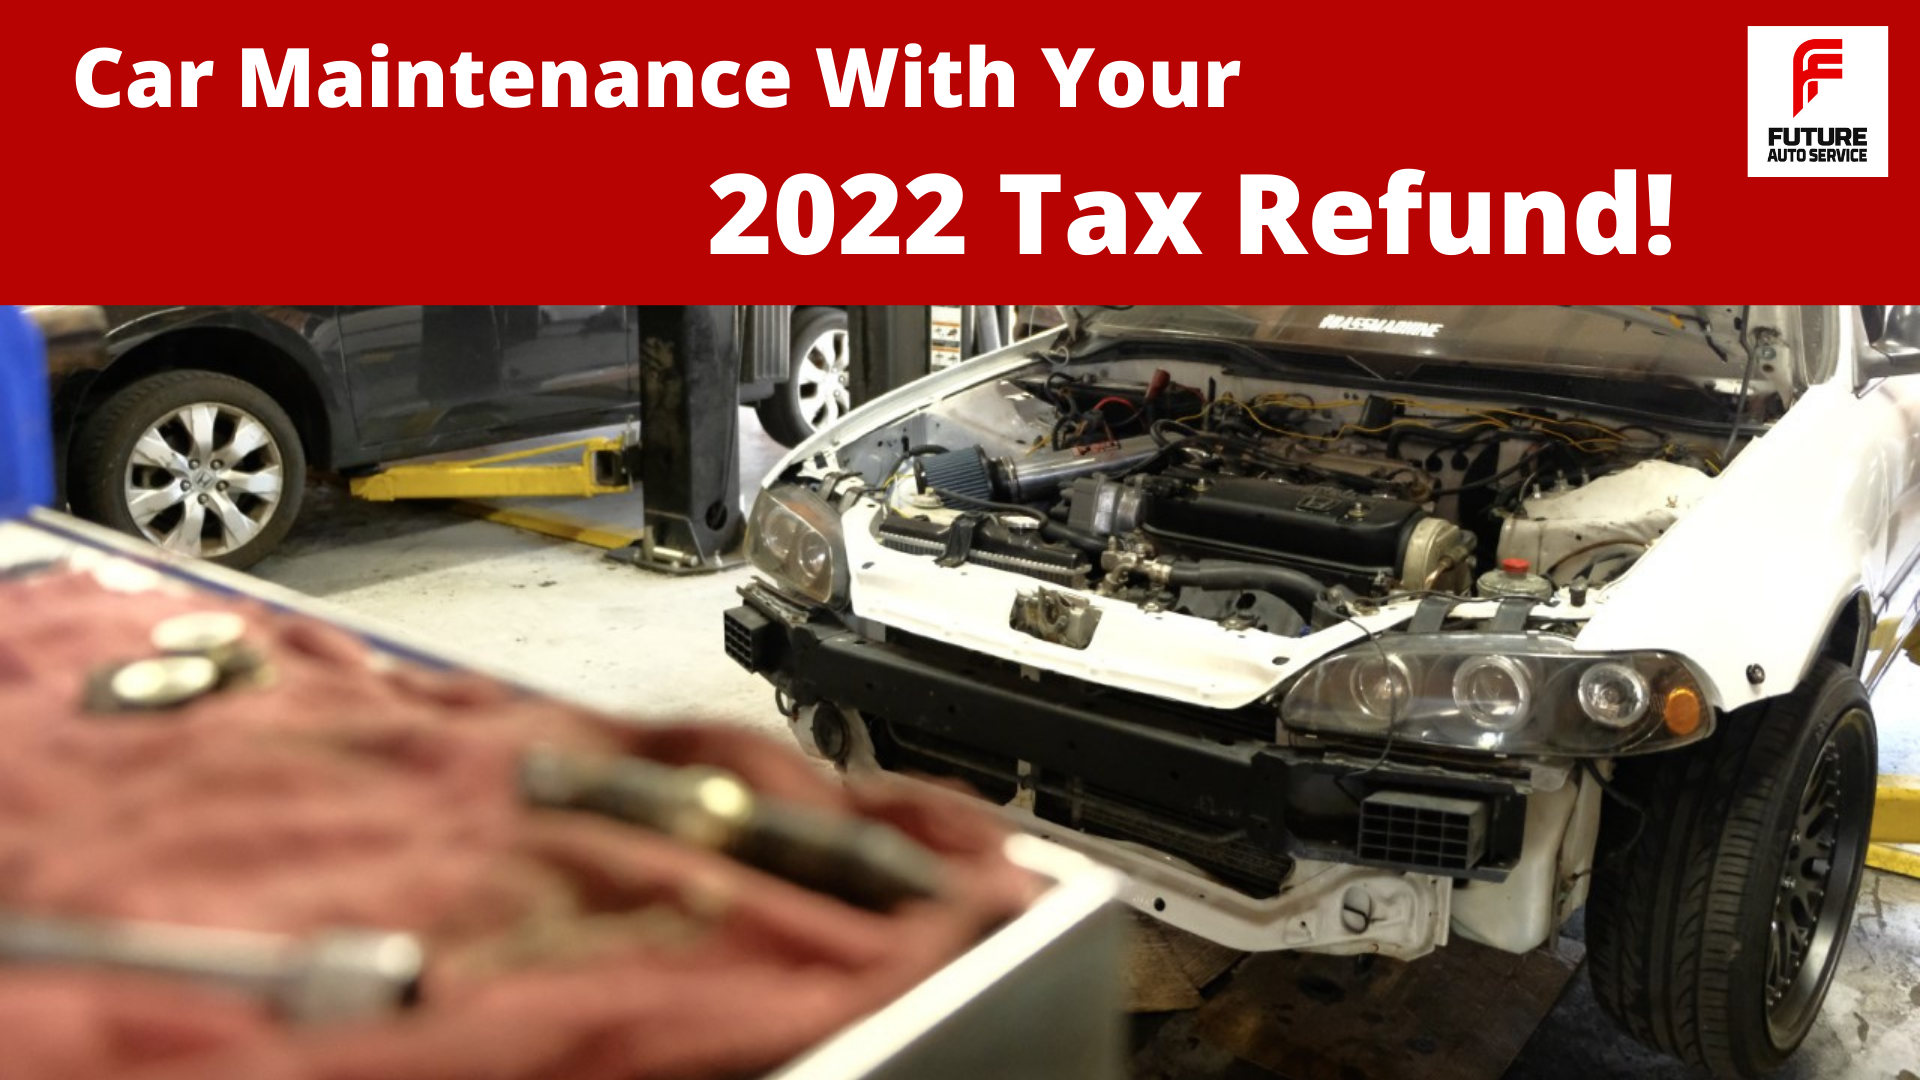 Car Maintenance With Your 2022 Tax Refund!